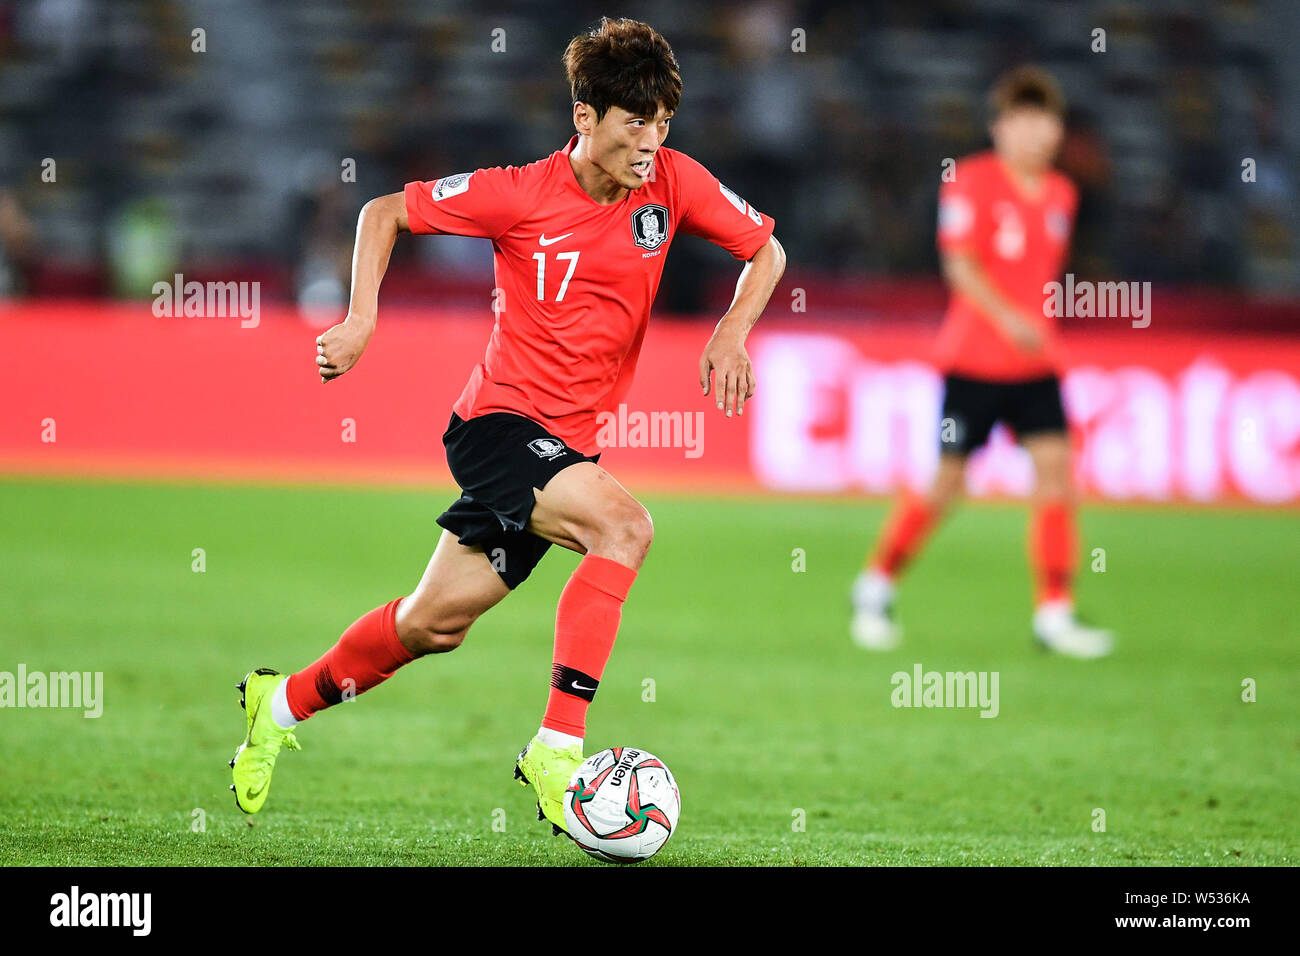 Lee Chung-yong of South Korea national football team dribbles against Qatar national football team in their quarter-final match during the 2019 AFC As Stock Photo